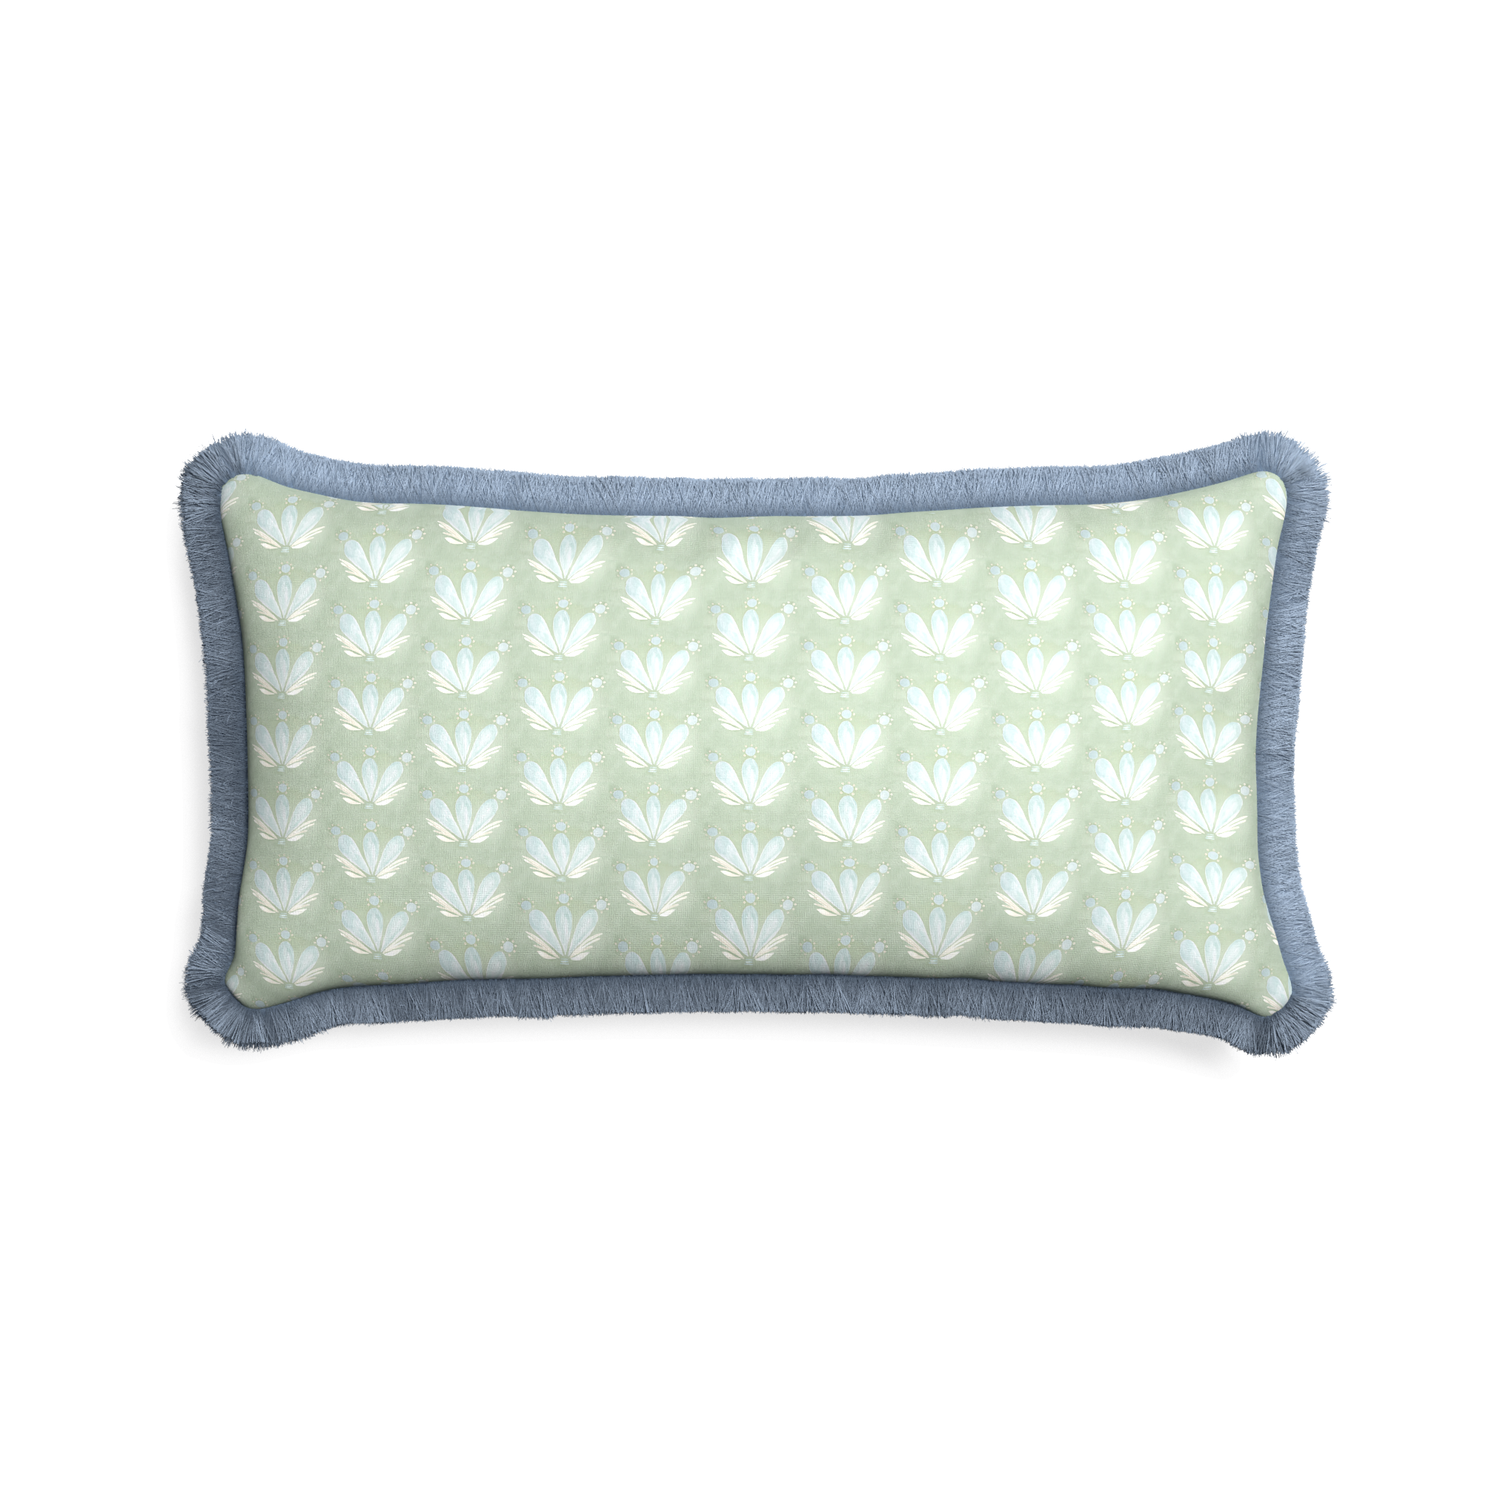 Midi-lumbar serena sea salt custom blue & green floral drop repeatpillow with sky fringe on white background